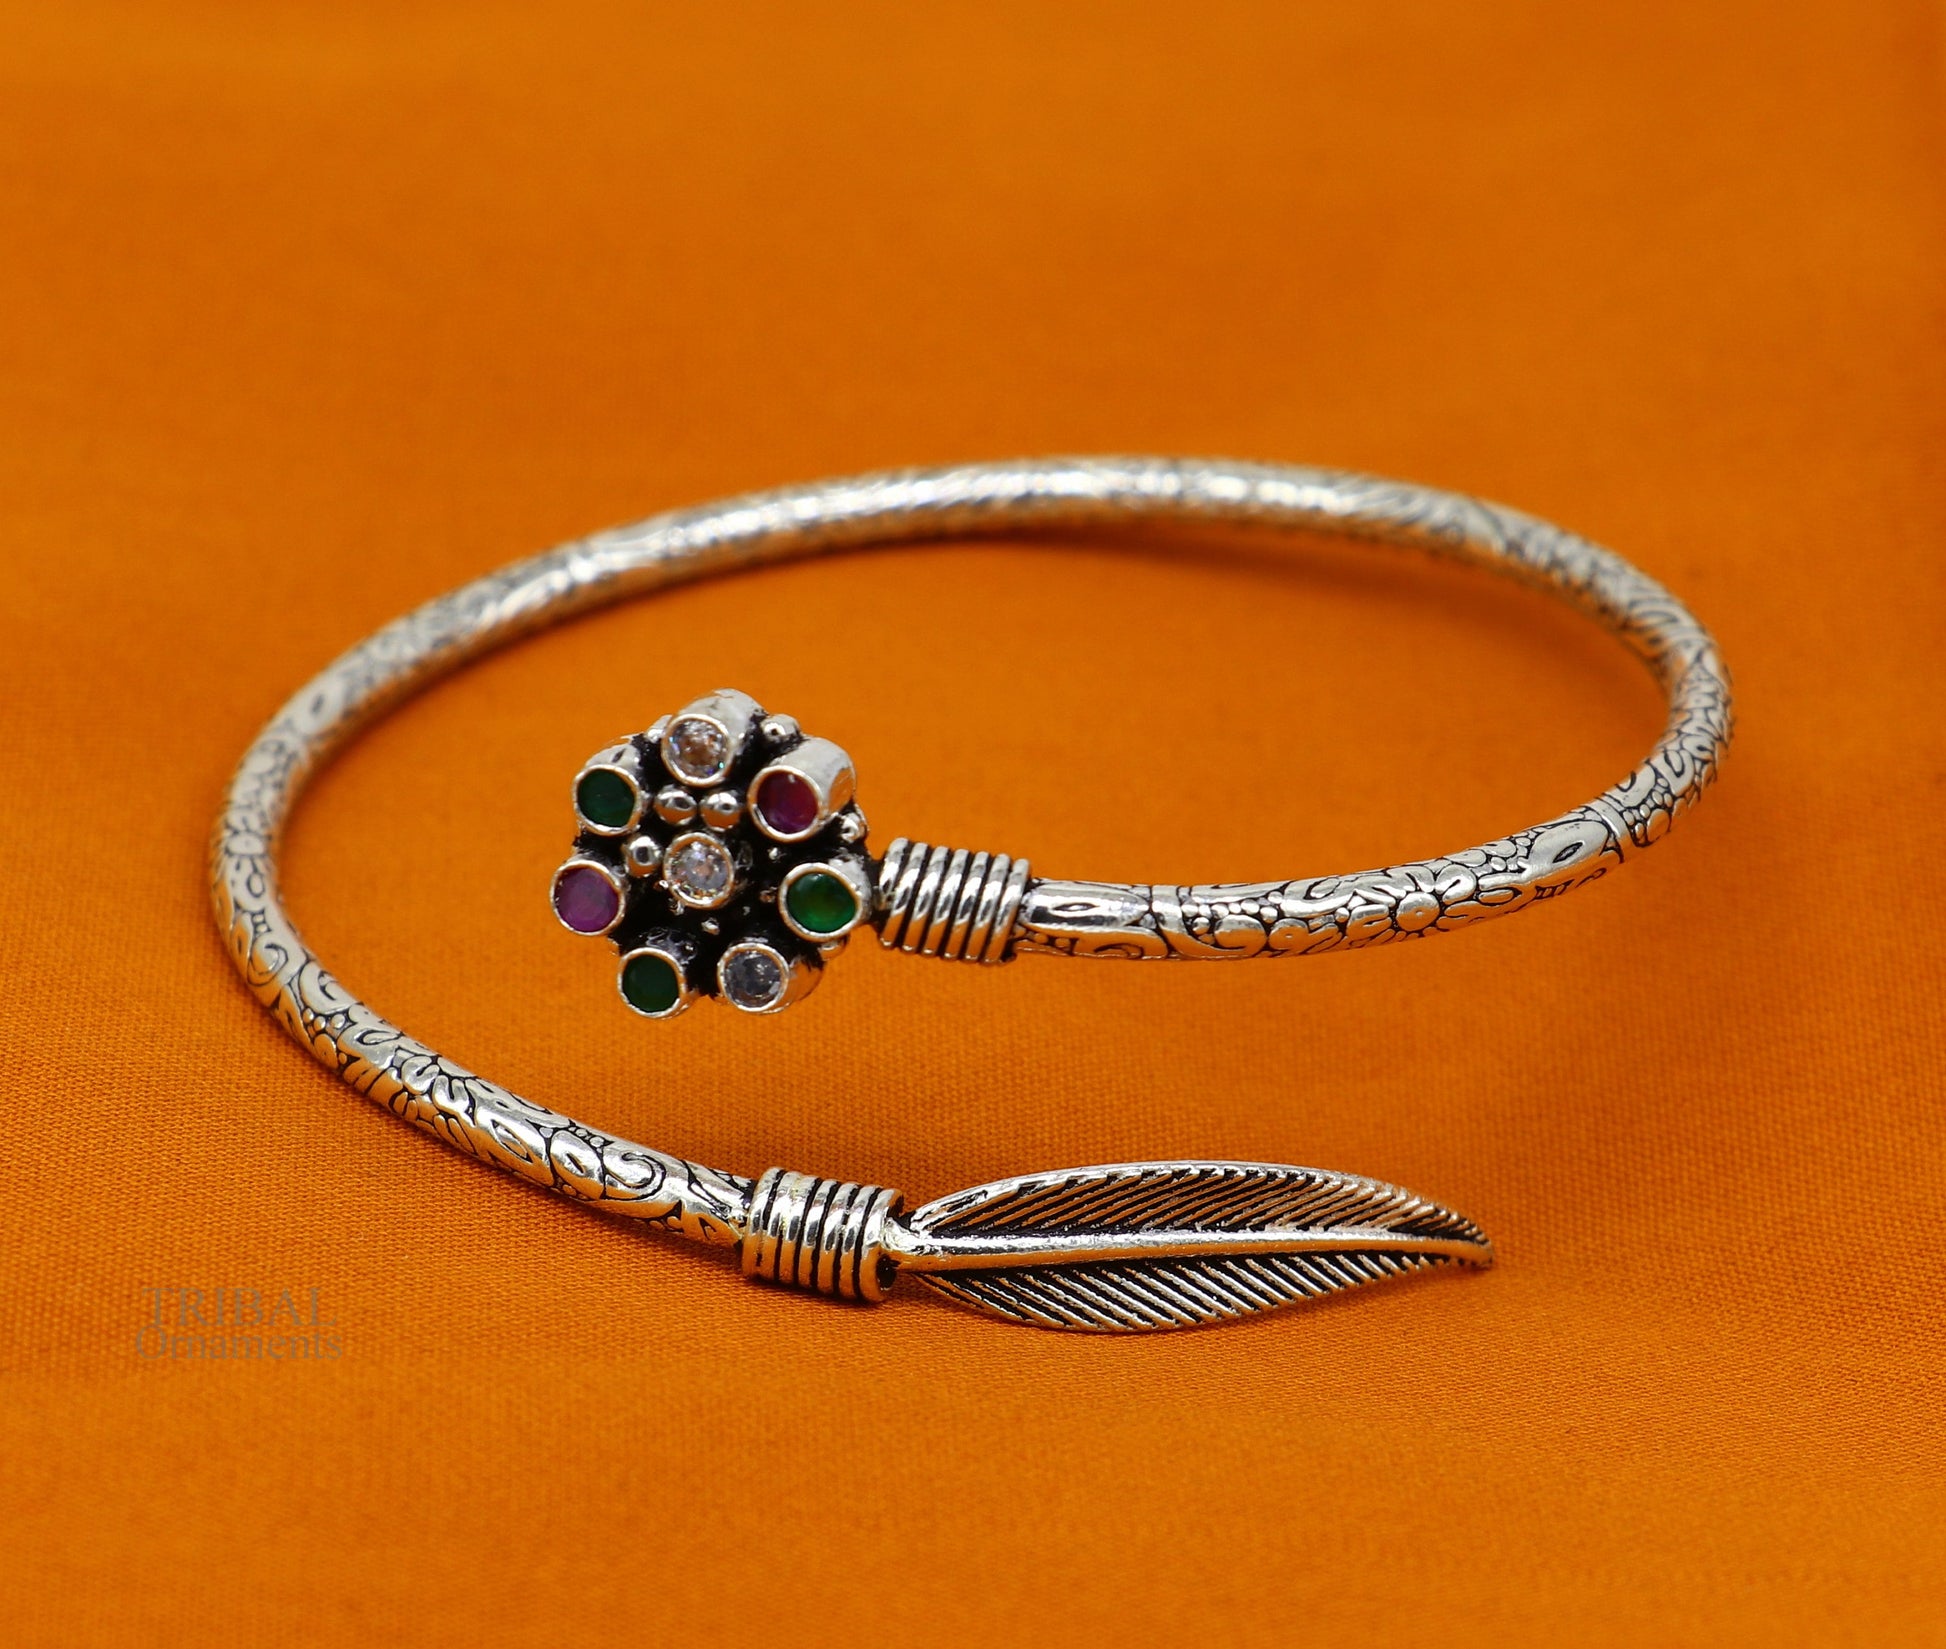 Feather style 925 sterling silver exclusive design handmade bangle bracelet, easy to plug with your wrist, pure silver kada jewelry nssk670 - TRIBAL ORNAMENTS